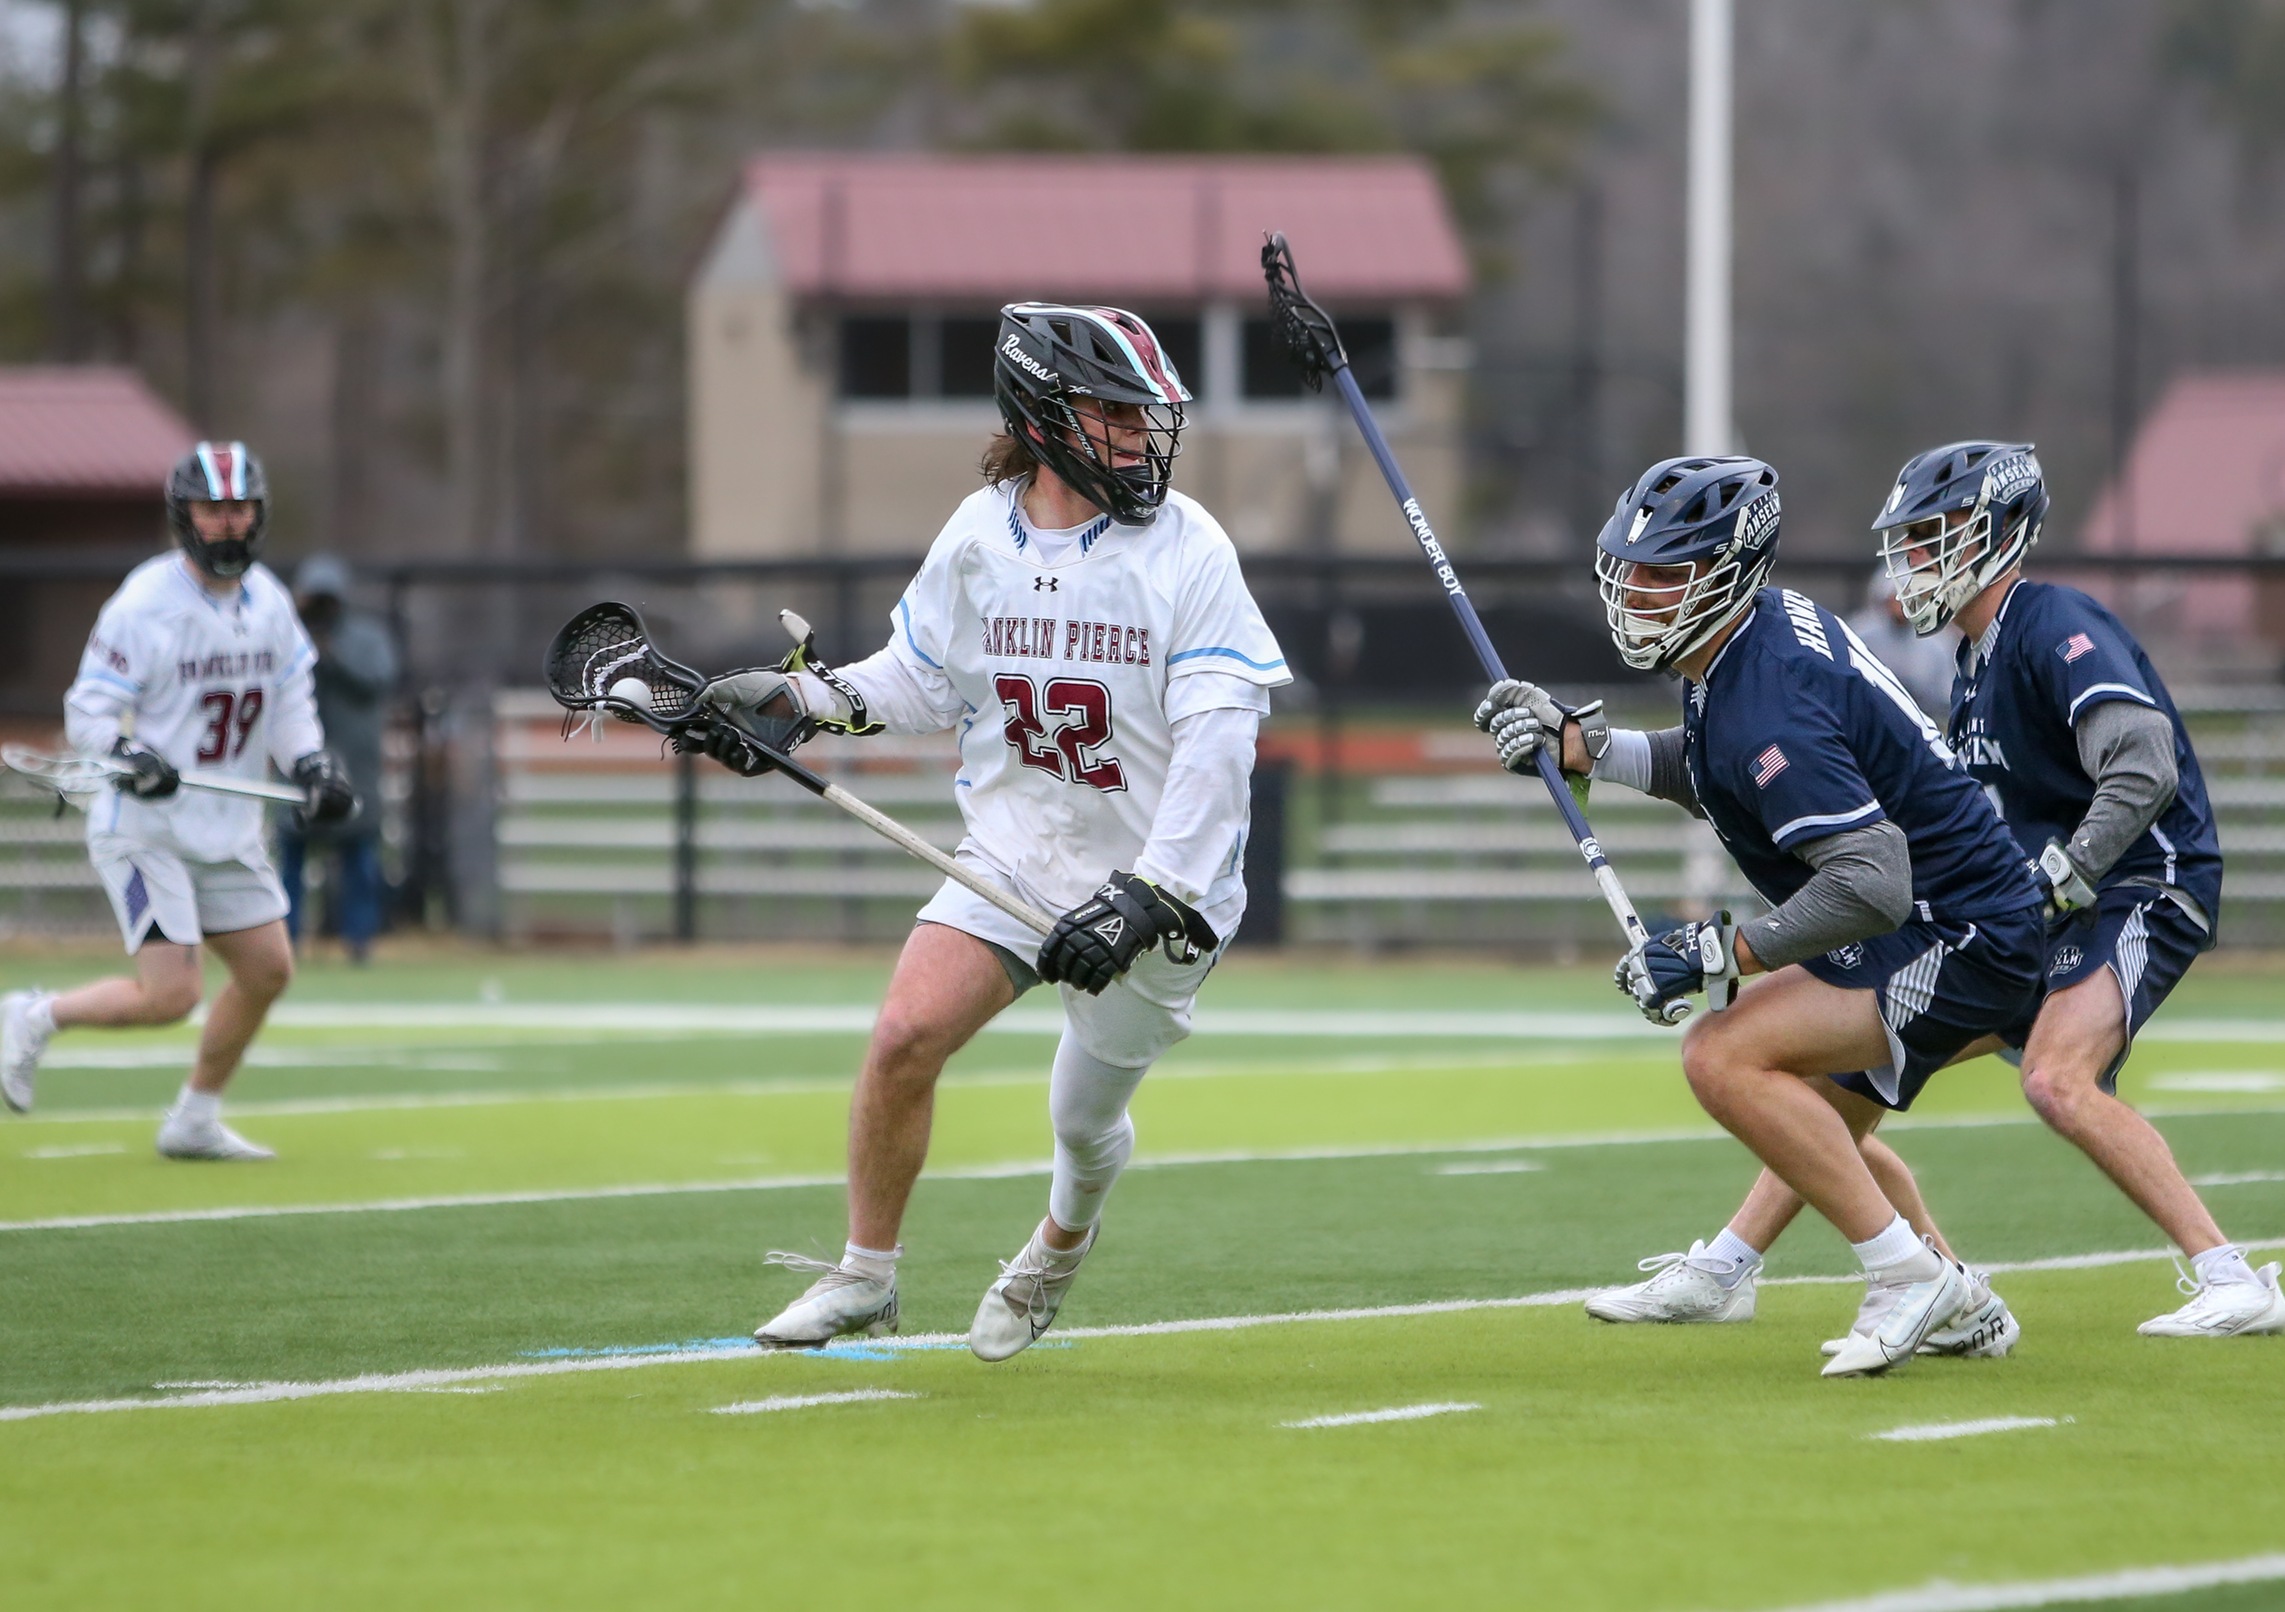 Shaky Start Dooms Men's Lacrosse In 17-7 Loss To No. 11 Saint Anselm College